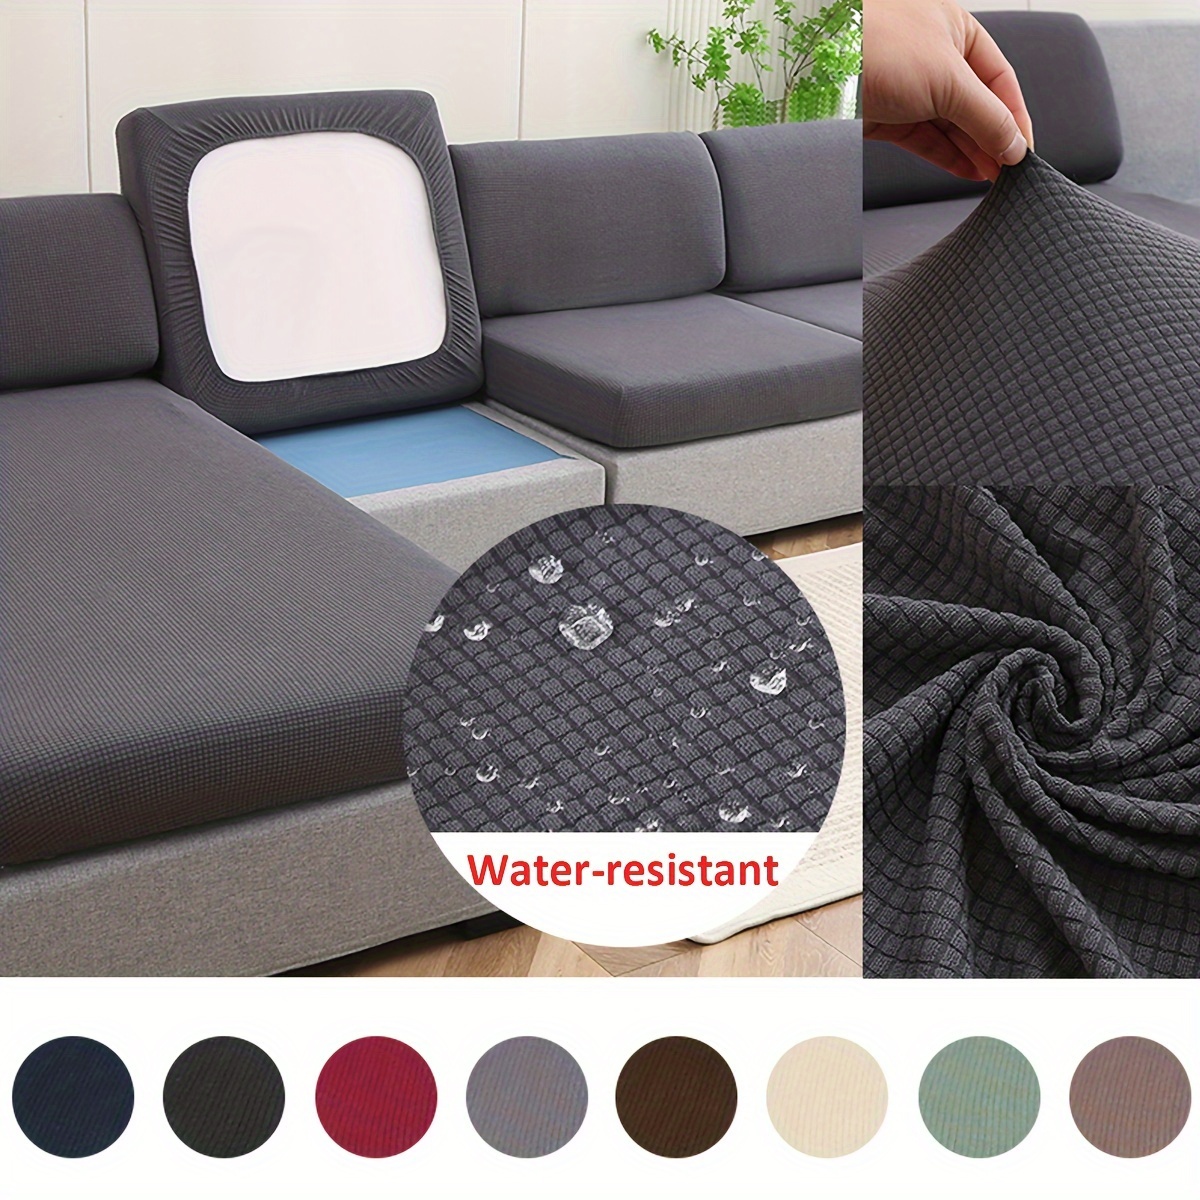 

1pc Waterproof Non-slip Sofa Cover - Protect Your Furniture And Add Style To Your Home Decor